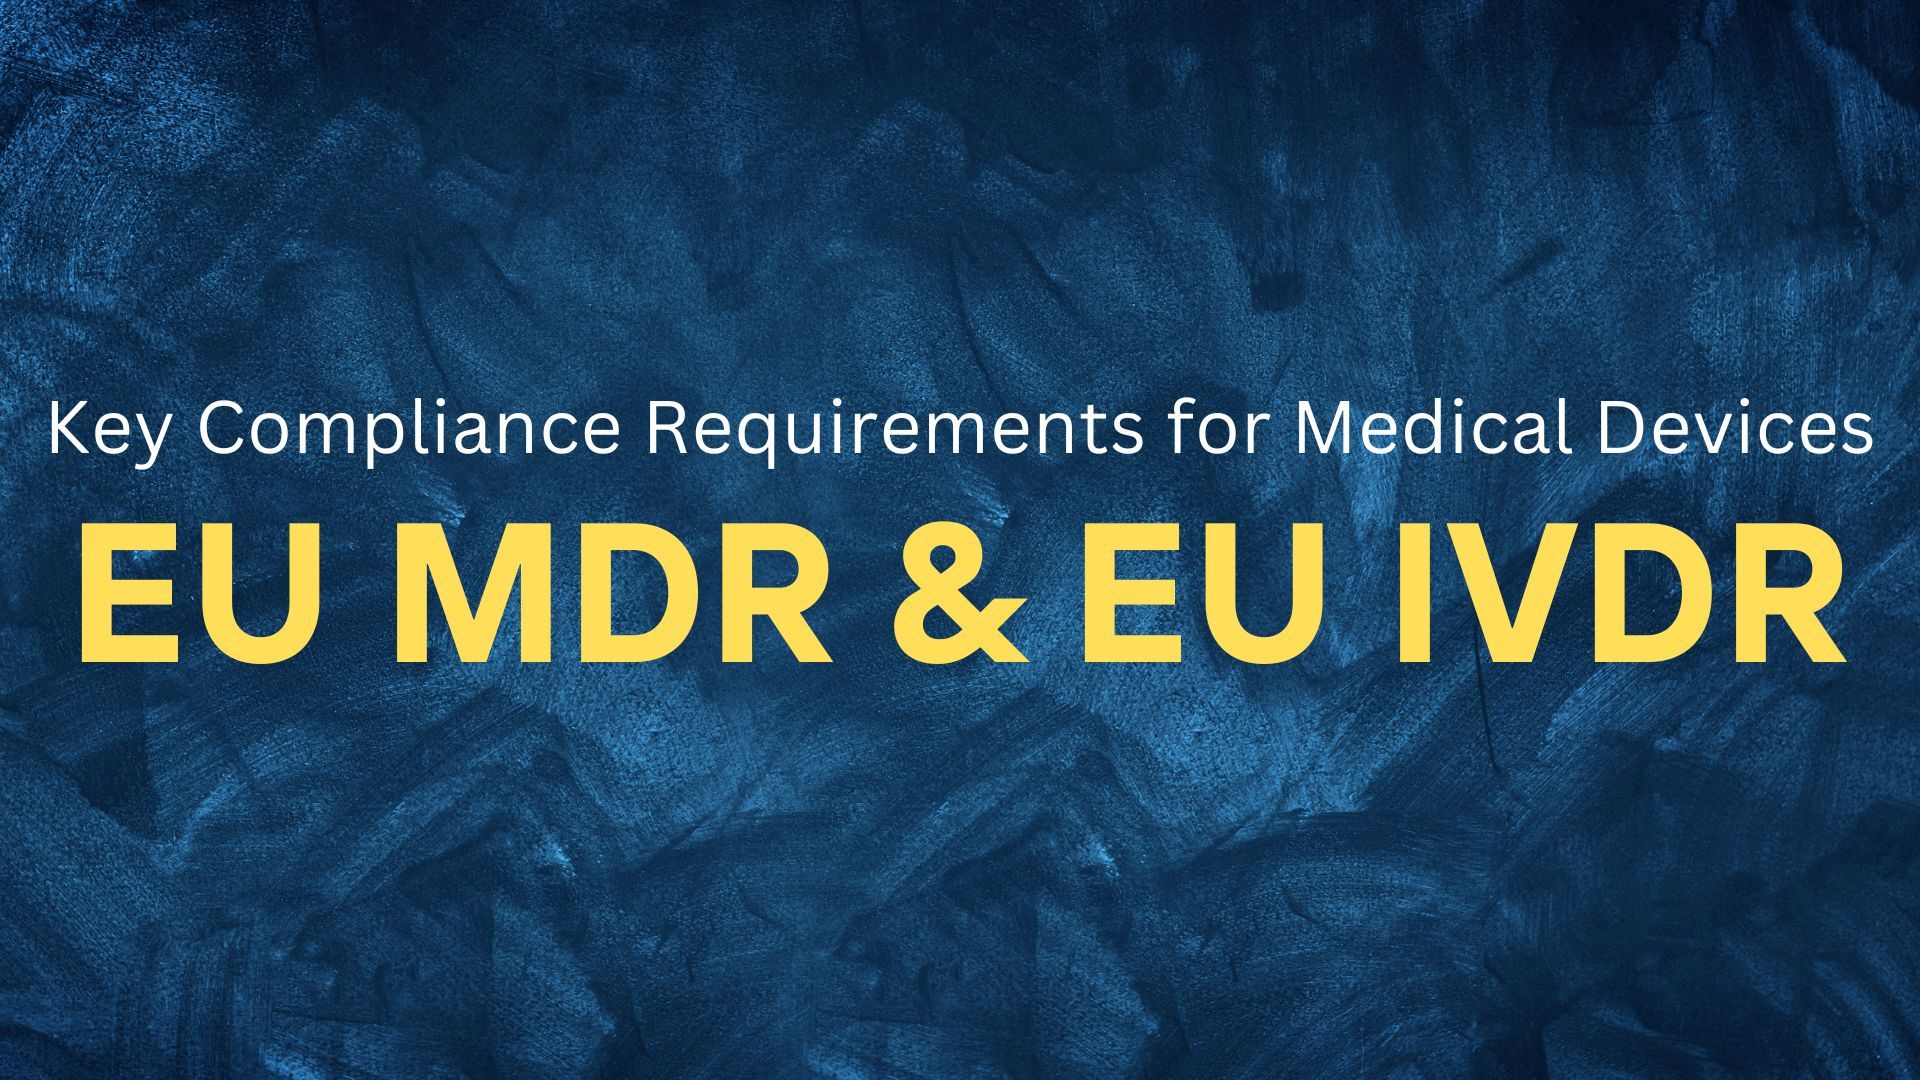 Understanding the Compliance Requirements for Medical Devices in the EU - EU MDR & EU IVDR